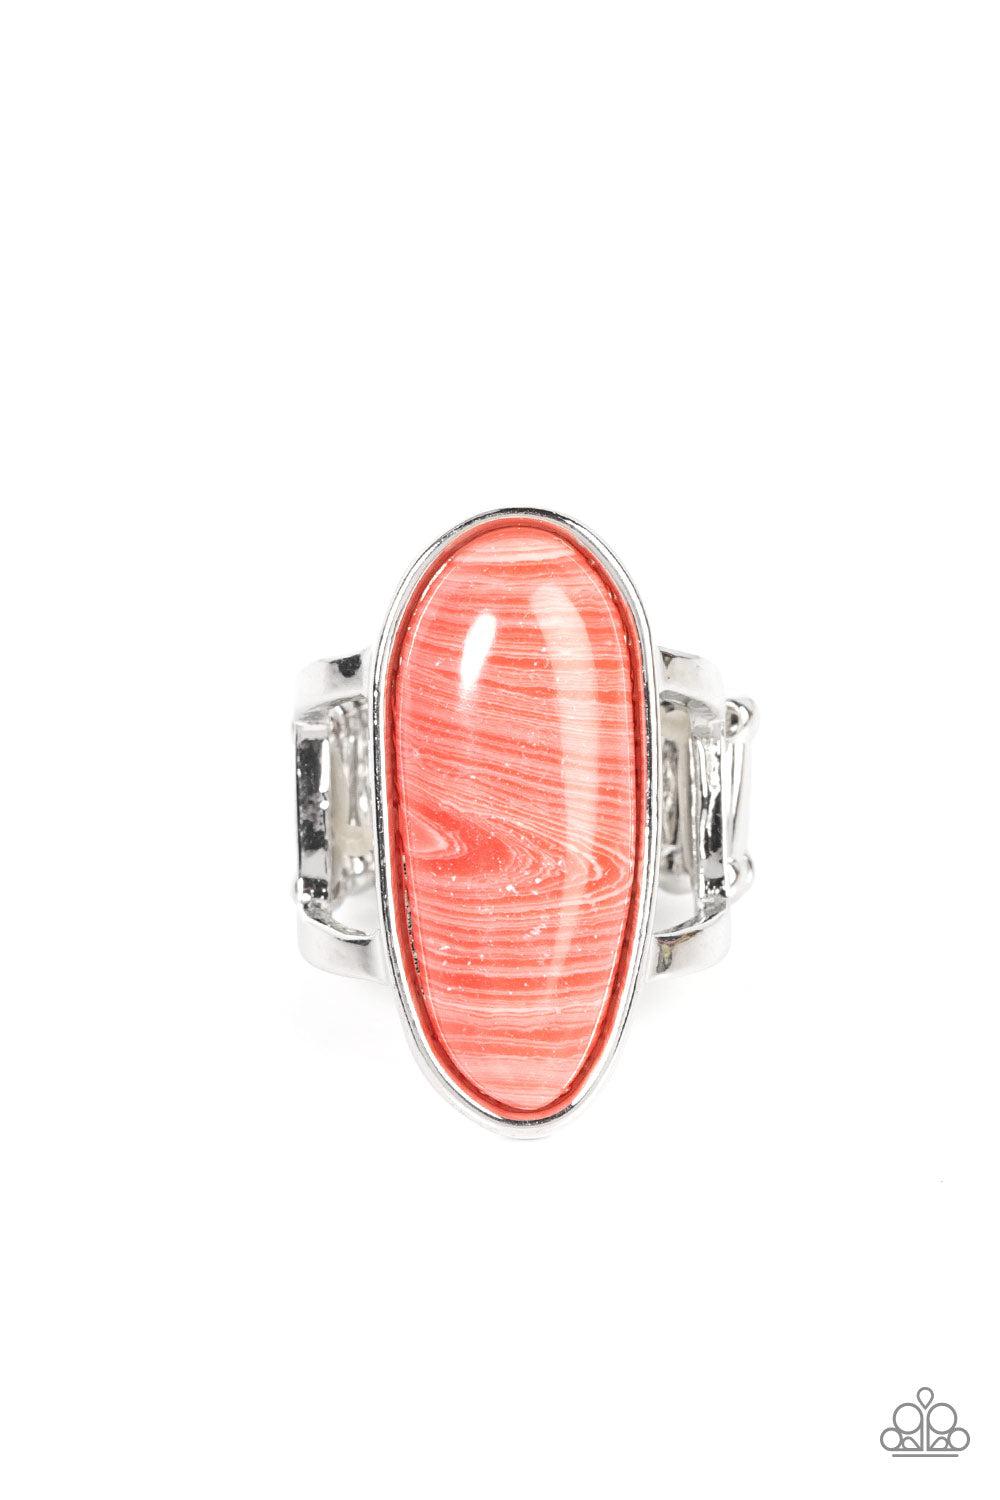 Eco Expression Pink Ring - Paparazzi Accessories- lightbox - CarasShop.com - $5 Jewelry by Cara Jewels